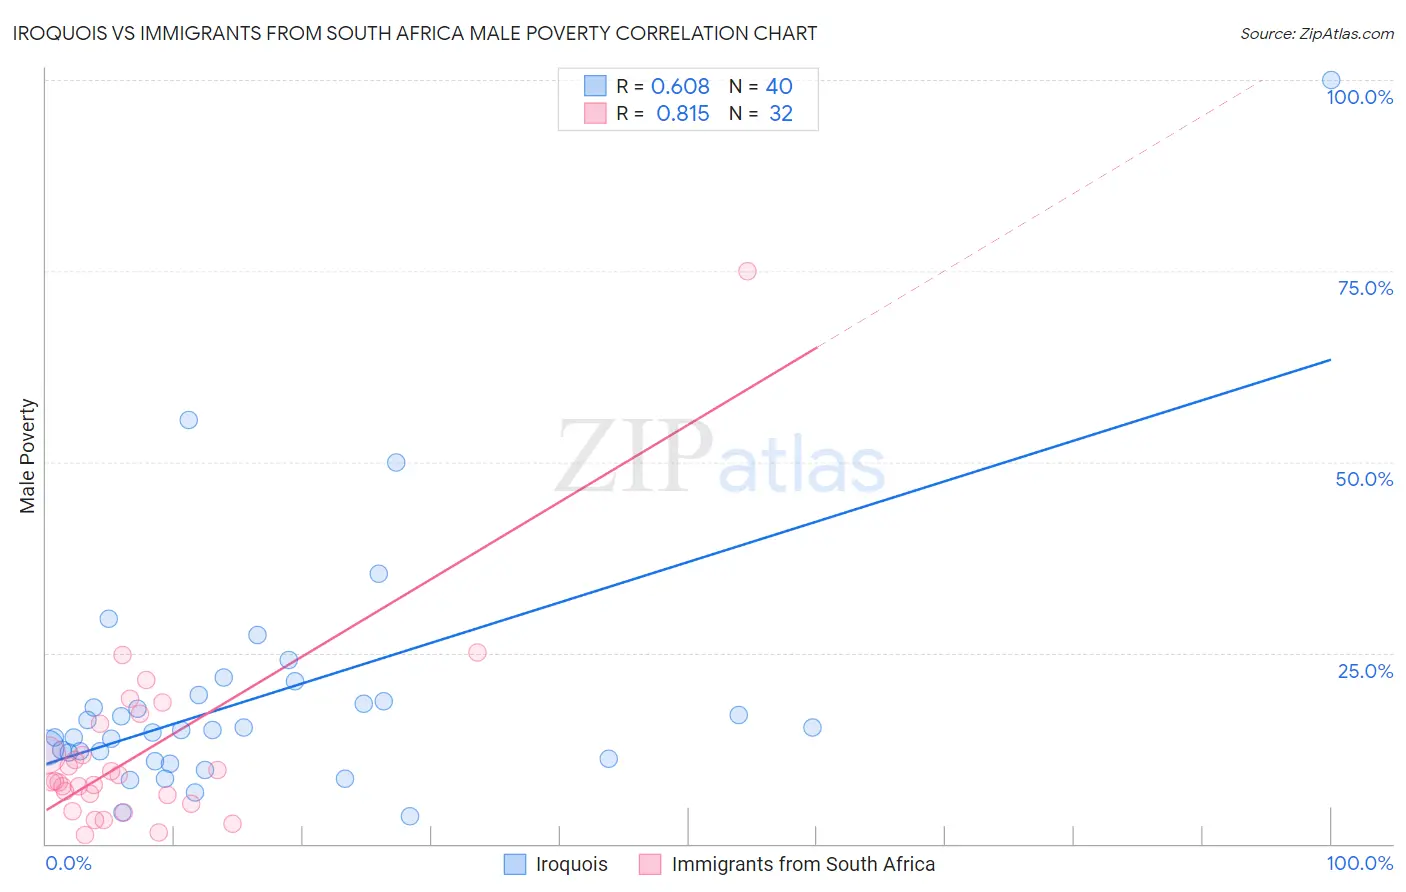 Iroquois vs Immigrants from South Africa Male Poverty